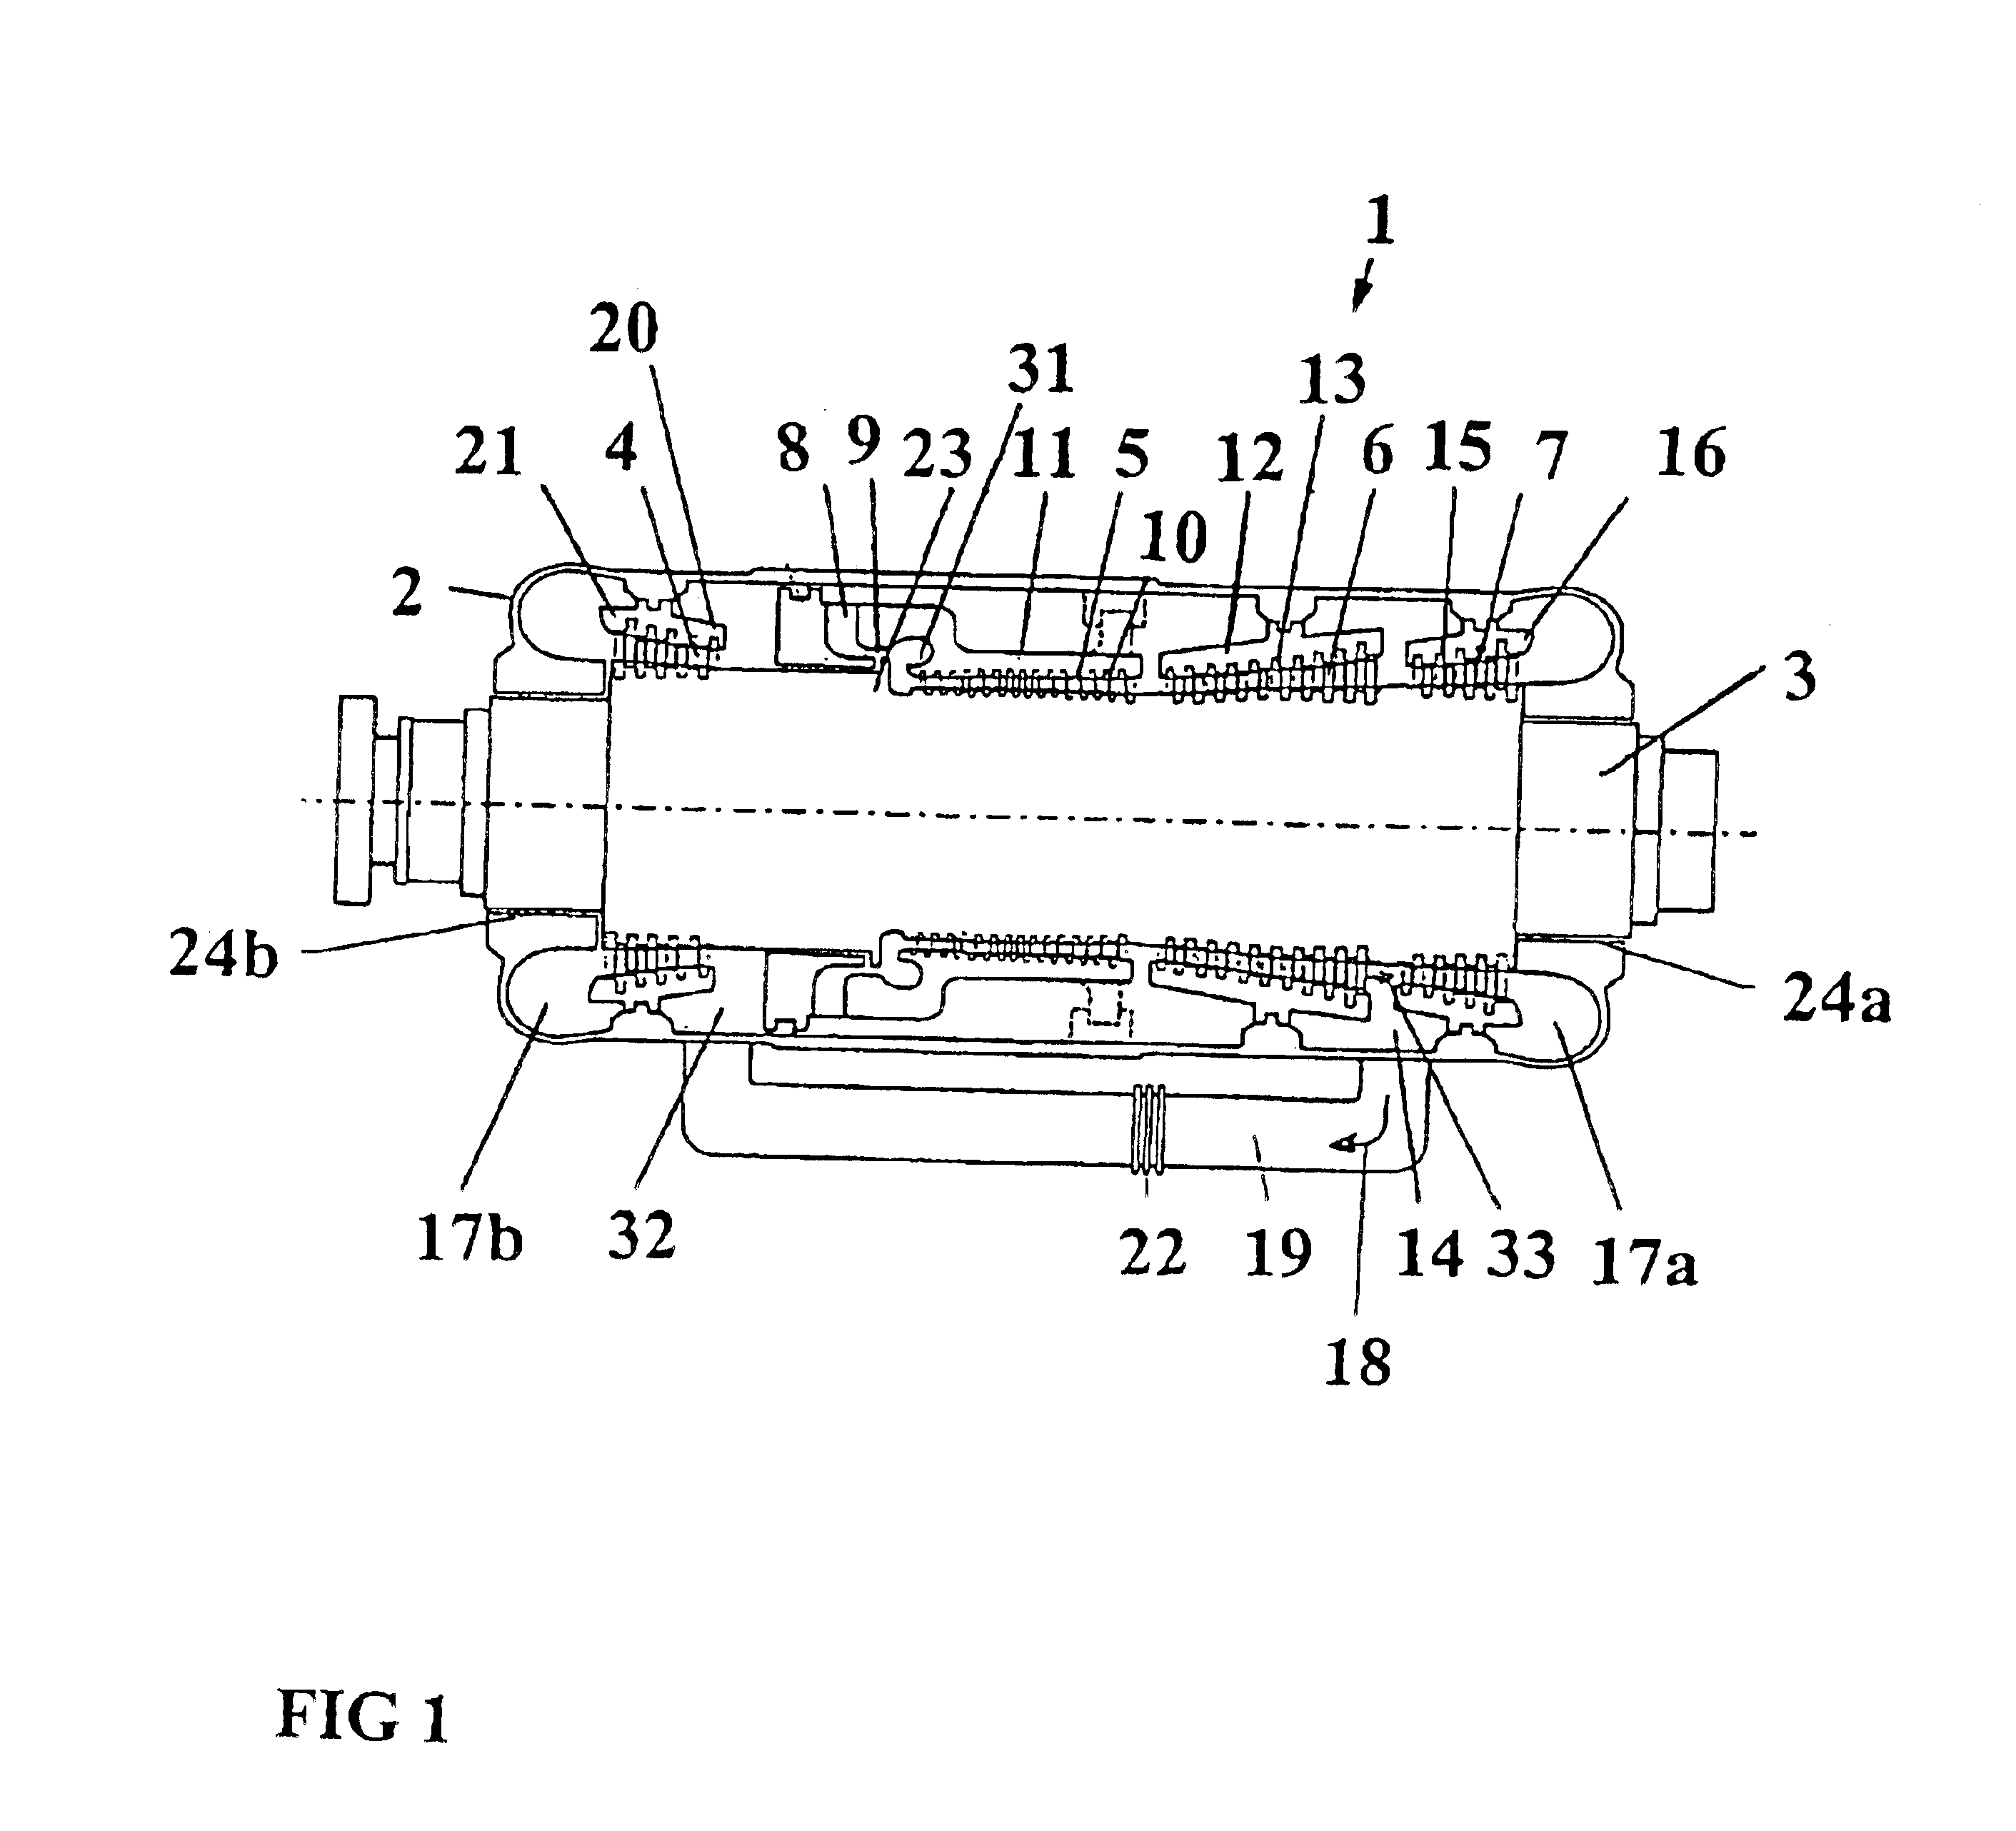 Fluid-flow machine with high-pressure and low-pressure regions